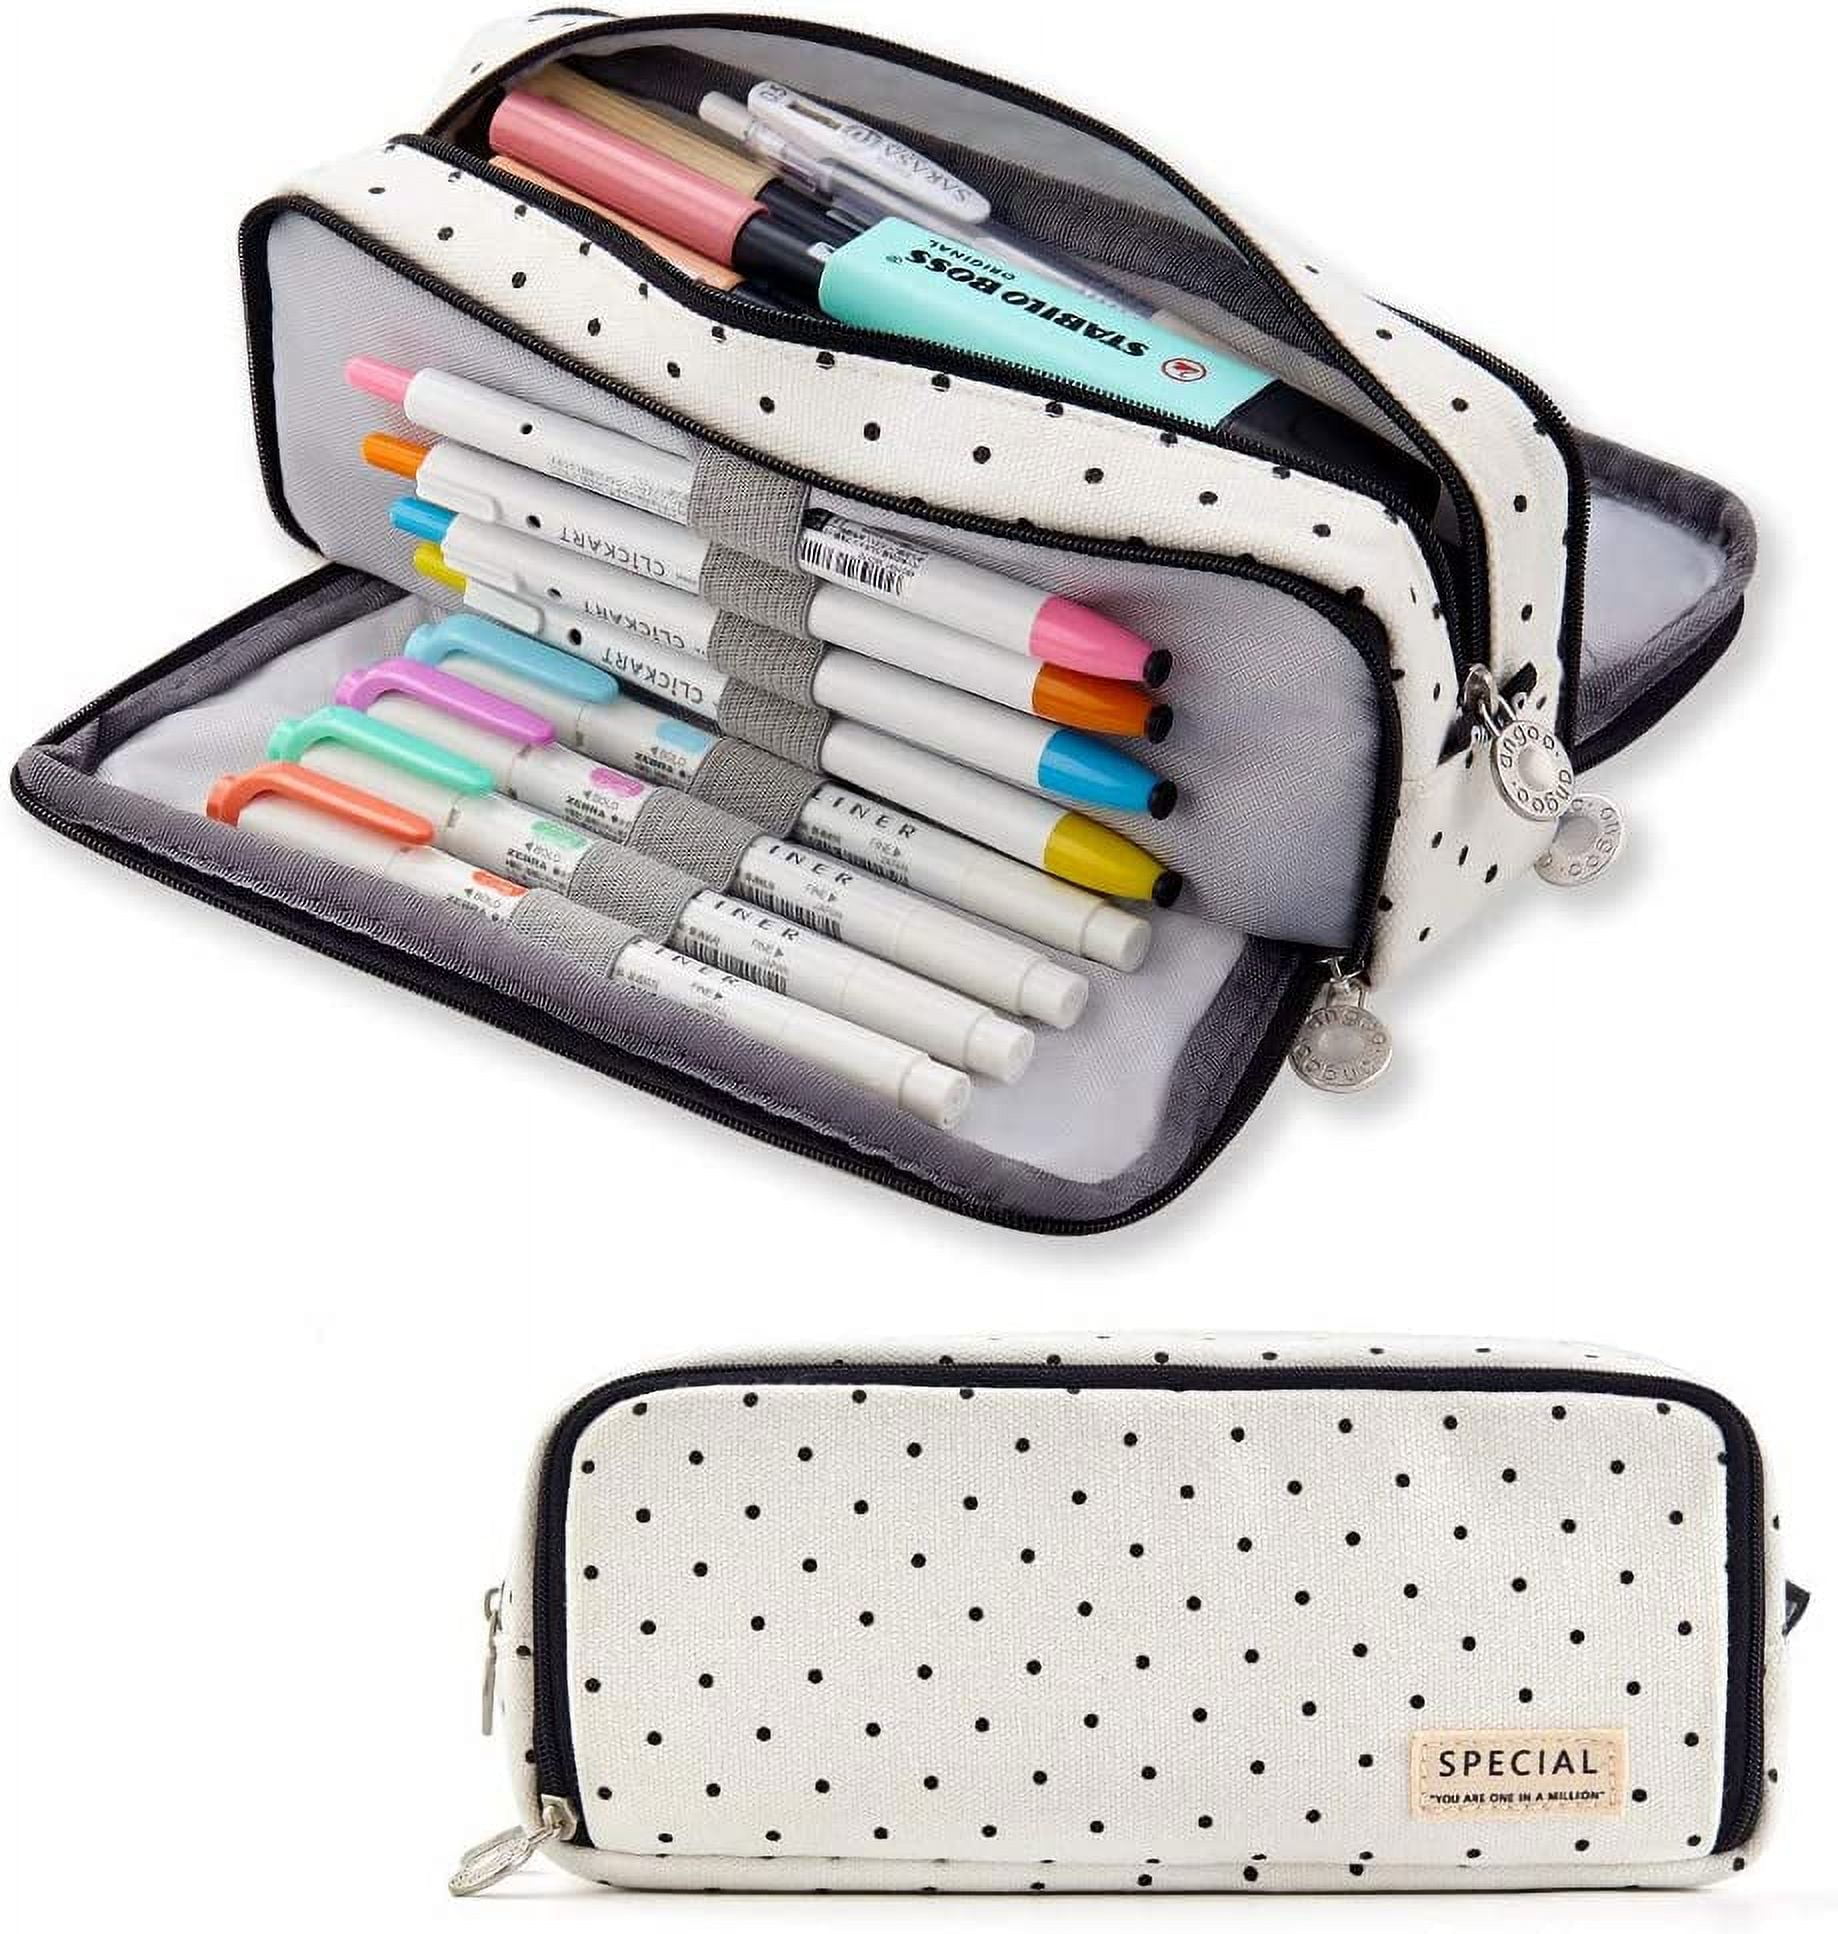 25 Clever Ways to Organize With a Pencil Pouch Organizer - Sharon E Hines